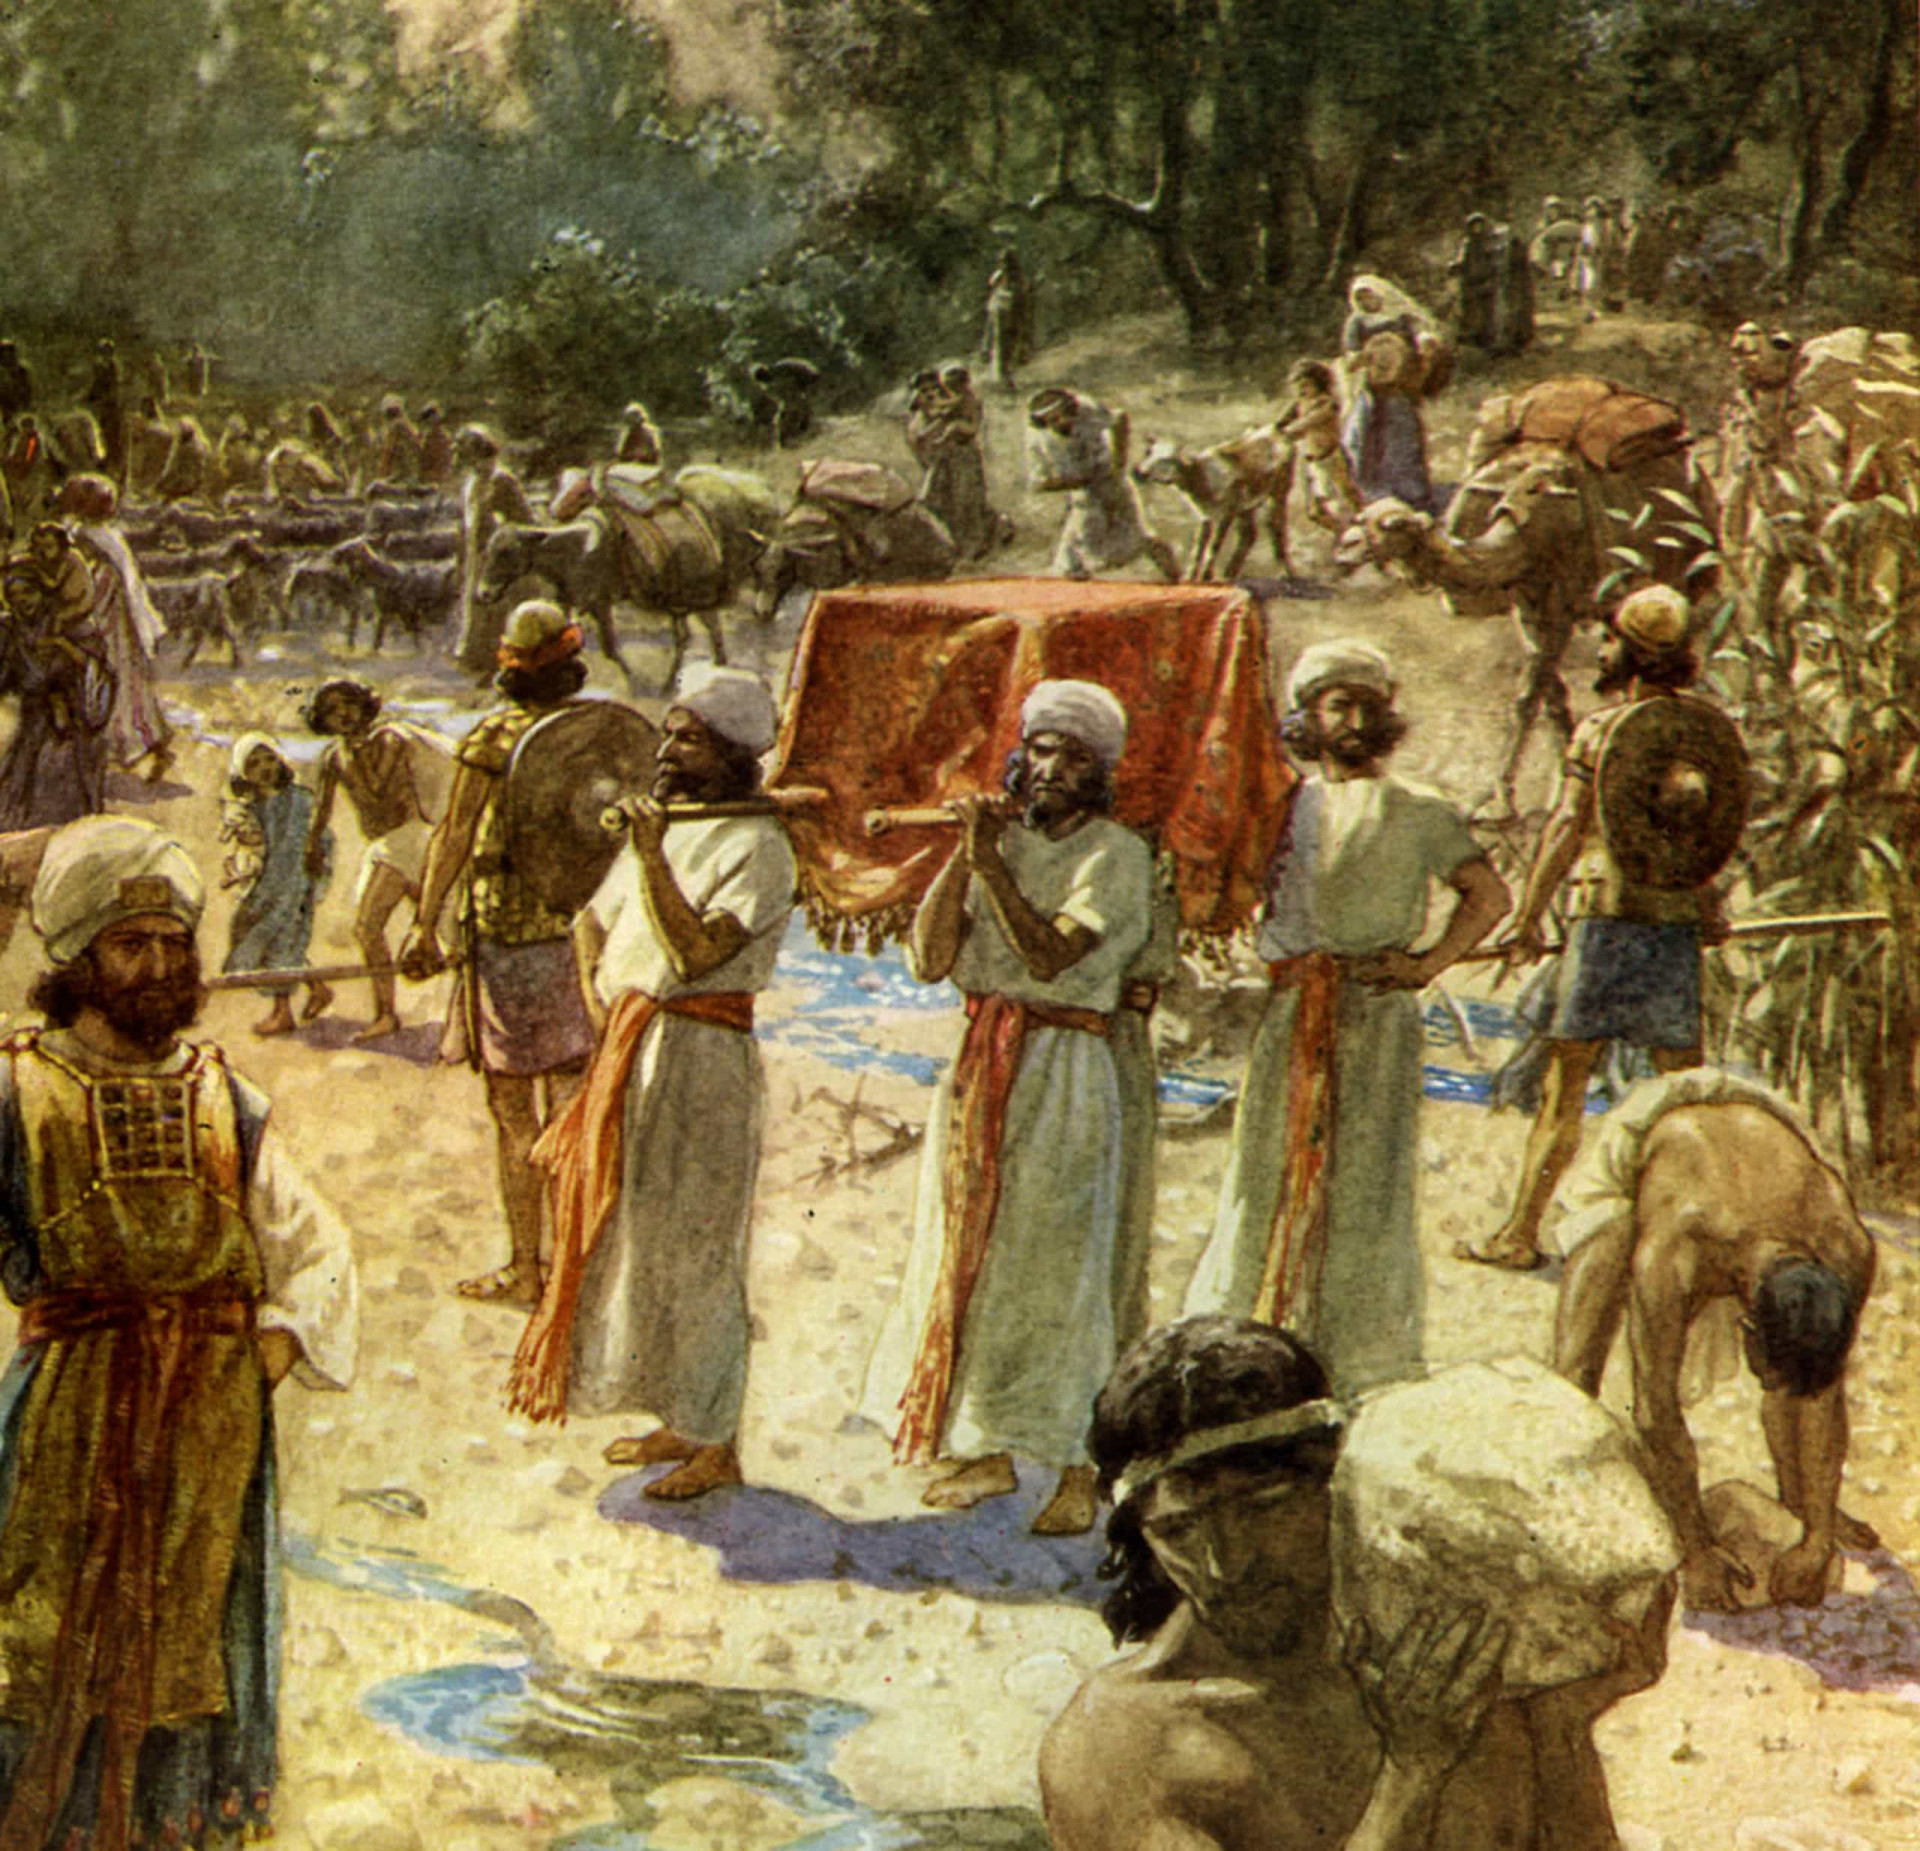 <p>Pictured: the Israelites, led by Joshua, crossing the <a href="https://www.starsinsider.com/lifestyle/309514/baptisms-in-all-their-wet-glory" rel="noopener">Jordan River</a> into the Promised Land. The Bible says that the river stopped flowing the minute the Ark-Bearers (pictured) set foot in it. In fact, the Ark has been linked to several of the Old Testament's miracles.</p><p>You may also like:<a href="https://www.starsinsider.com/n/268147?utm_source=msn.com&utm_medium=display&utm_campaign=referral_description&utm_content=452739v7en-ph"> The most shocking celebrity scandals of our time</a></p>